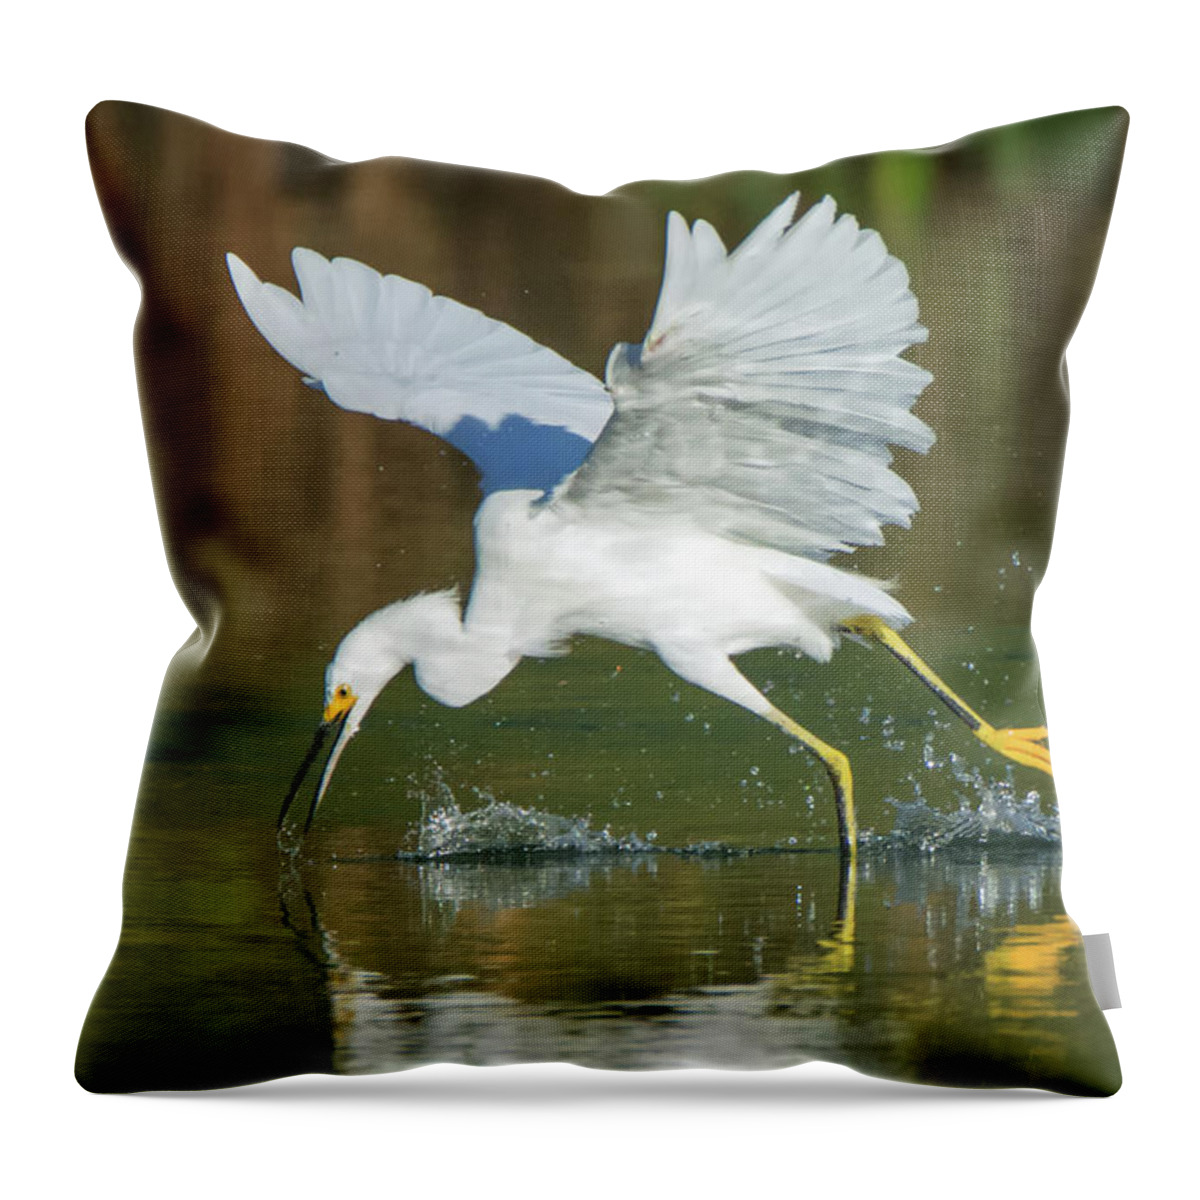 Snowy Throw Pillow featuring the photograph Snowy Egret 4845-091917-2cr by Tam Ryan